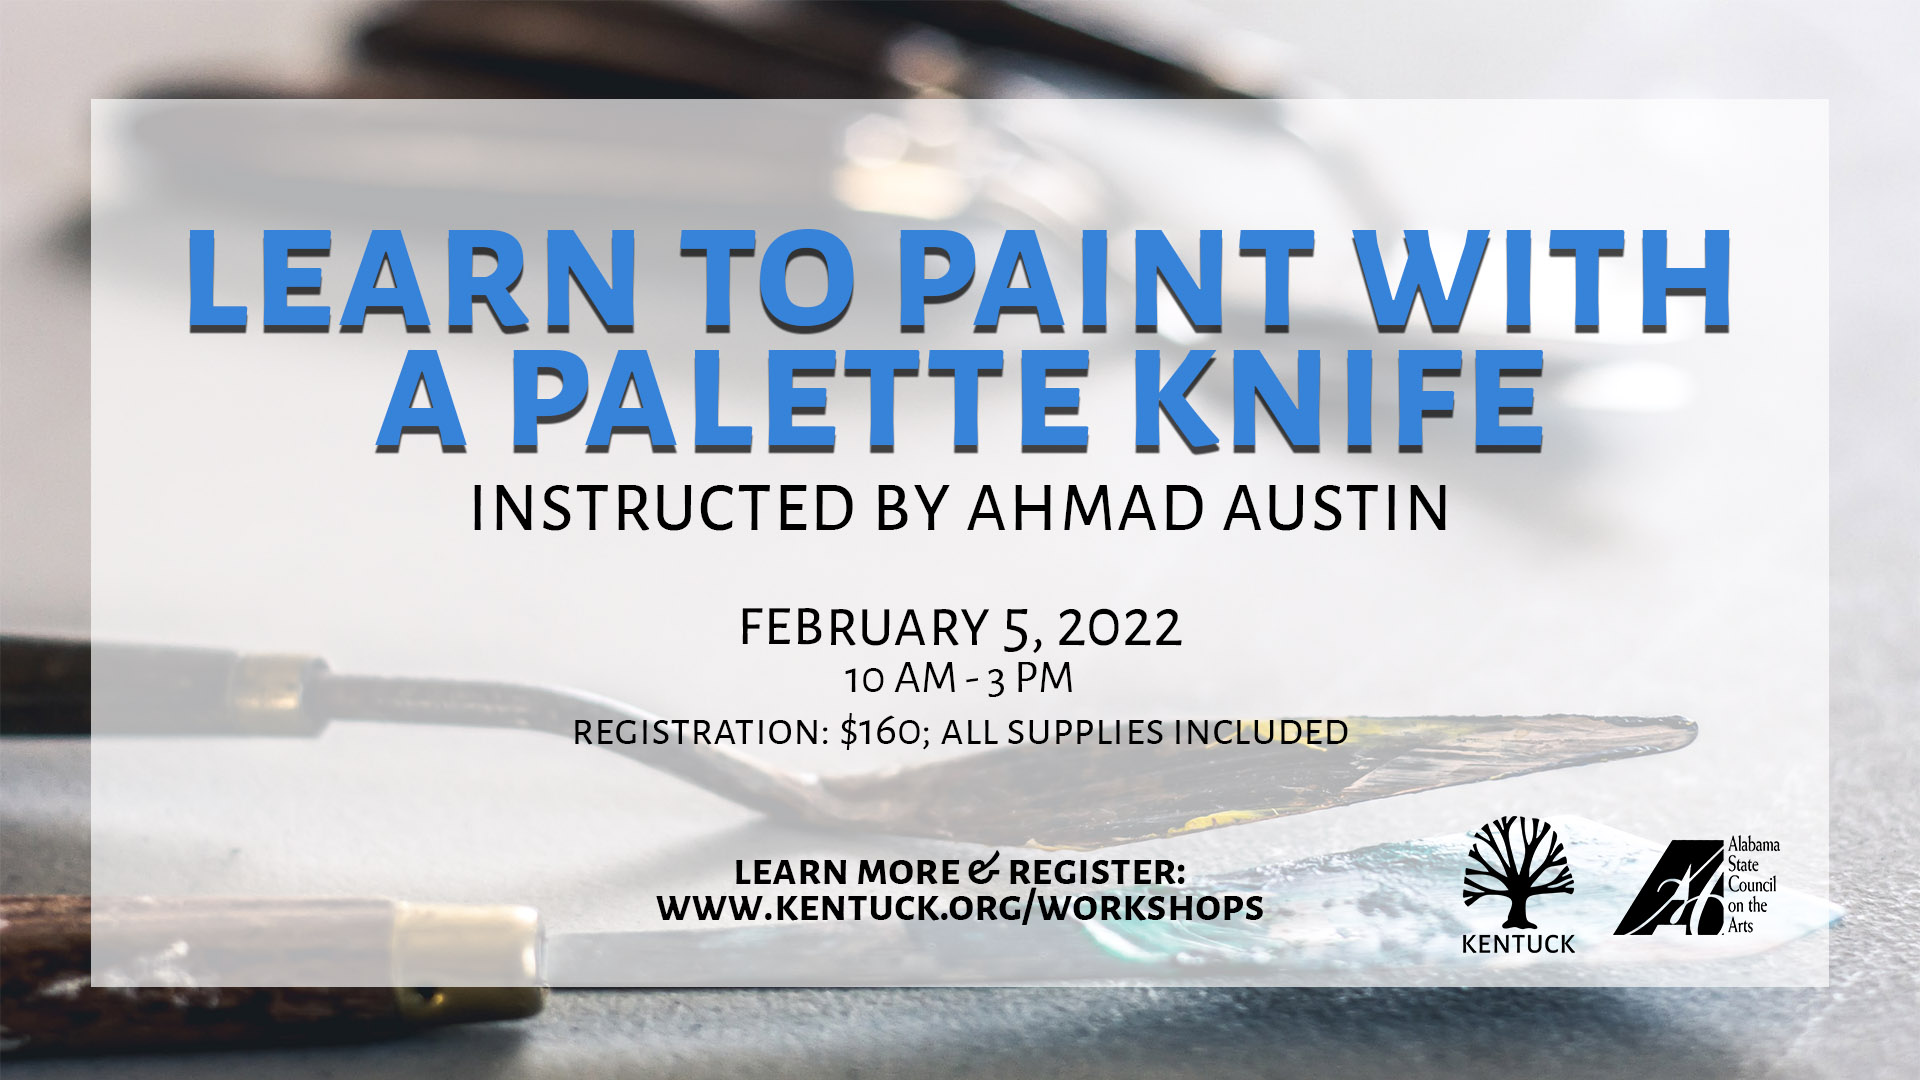 Learn to Paint with a Palette Knife with Ahmad Austin cover image